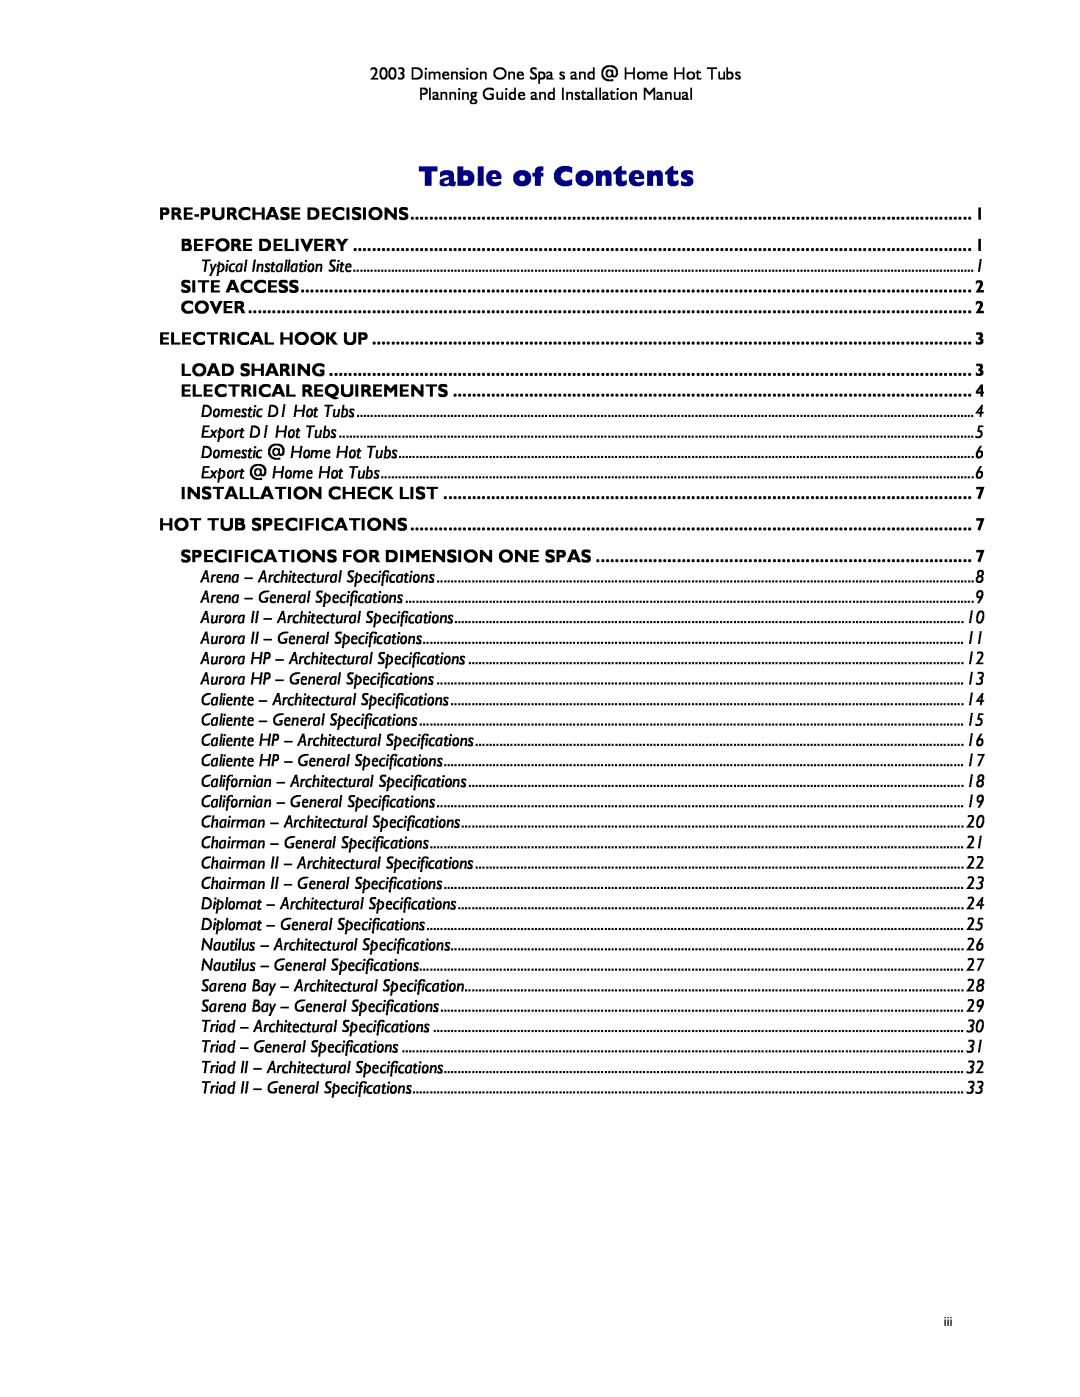 Dimension One Spas Hot Tub manual Table of Contents, Specifications For Dimension One Spas 